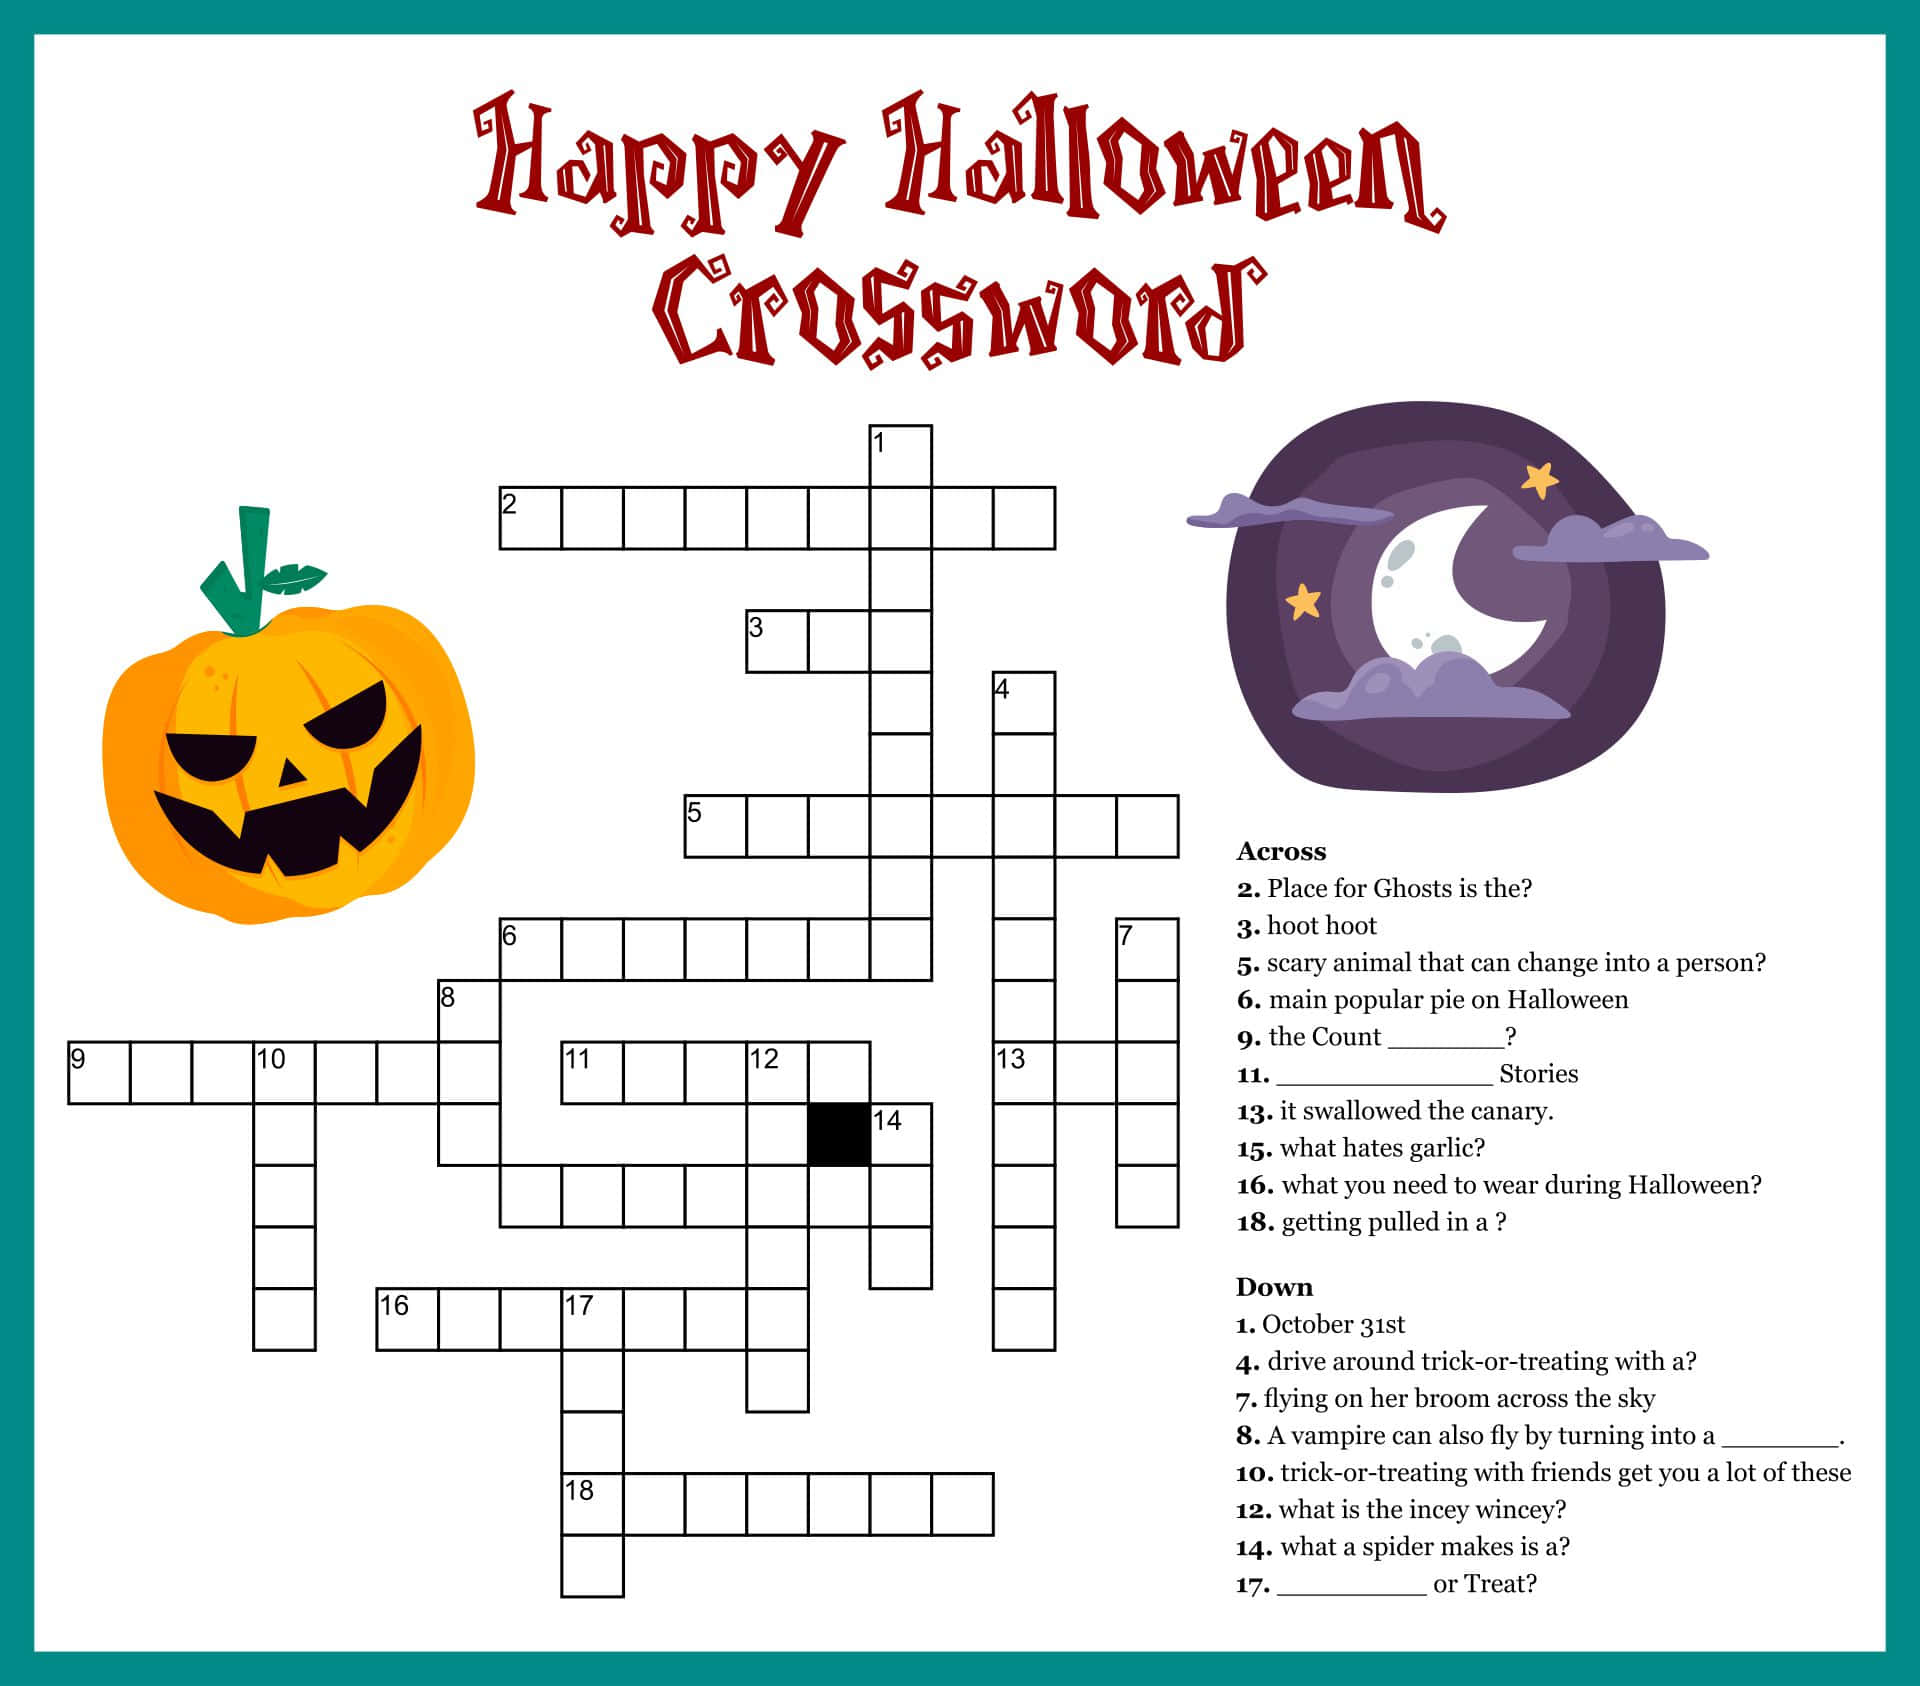 Get creative this Halloween with some unique and spooky puzzles. Wallpaper